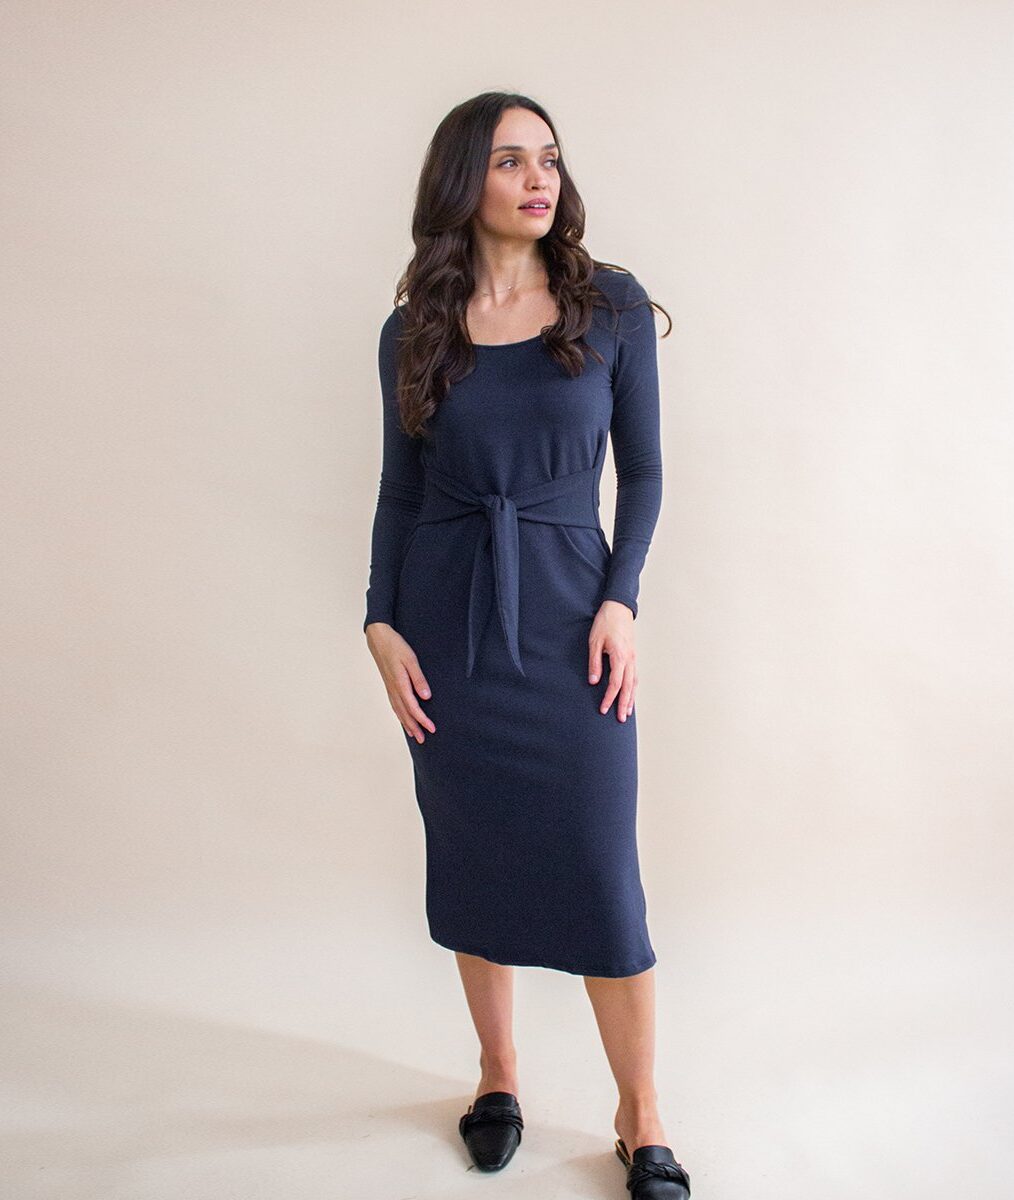 Model wearing a midi length dark blue tight dress with long sleeves from Encircled with black shoes